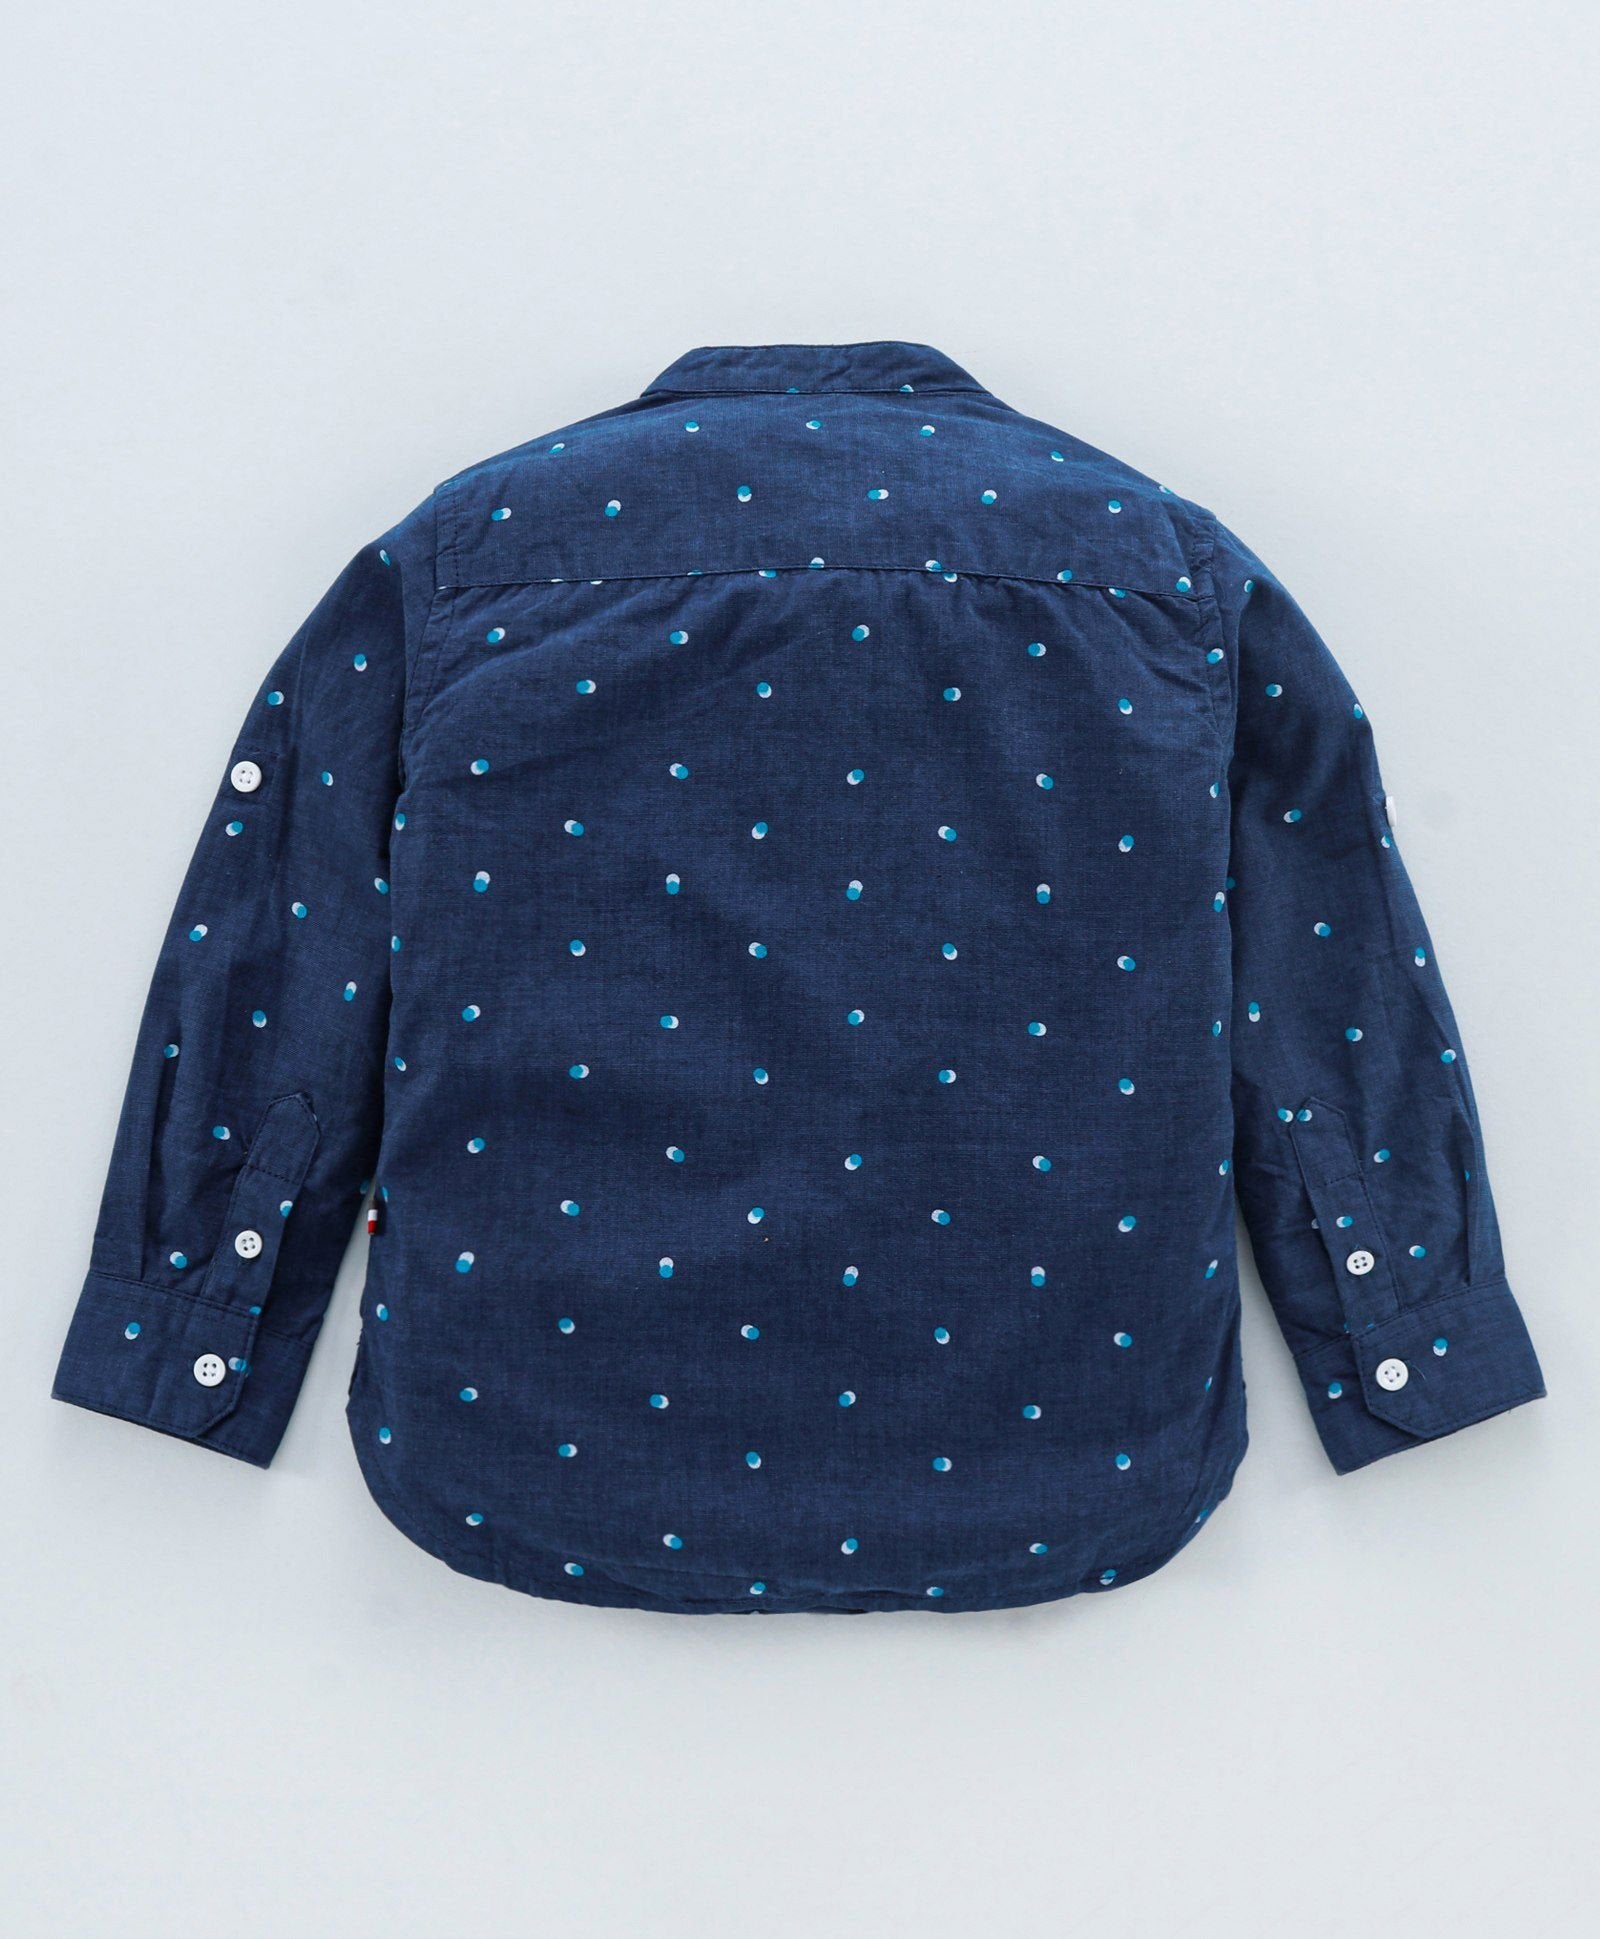 Full Sleeves All Over Printed 100% Cotton Soft Feel Bio-wash Shirt - Navy